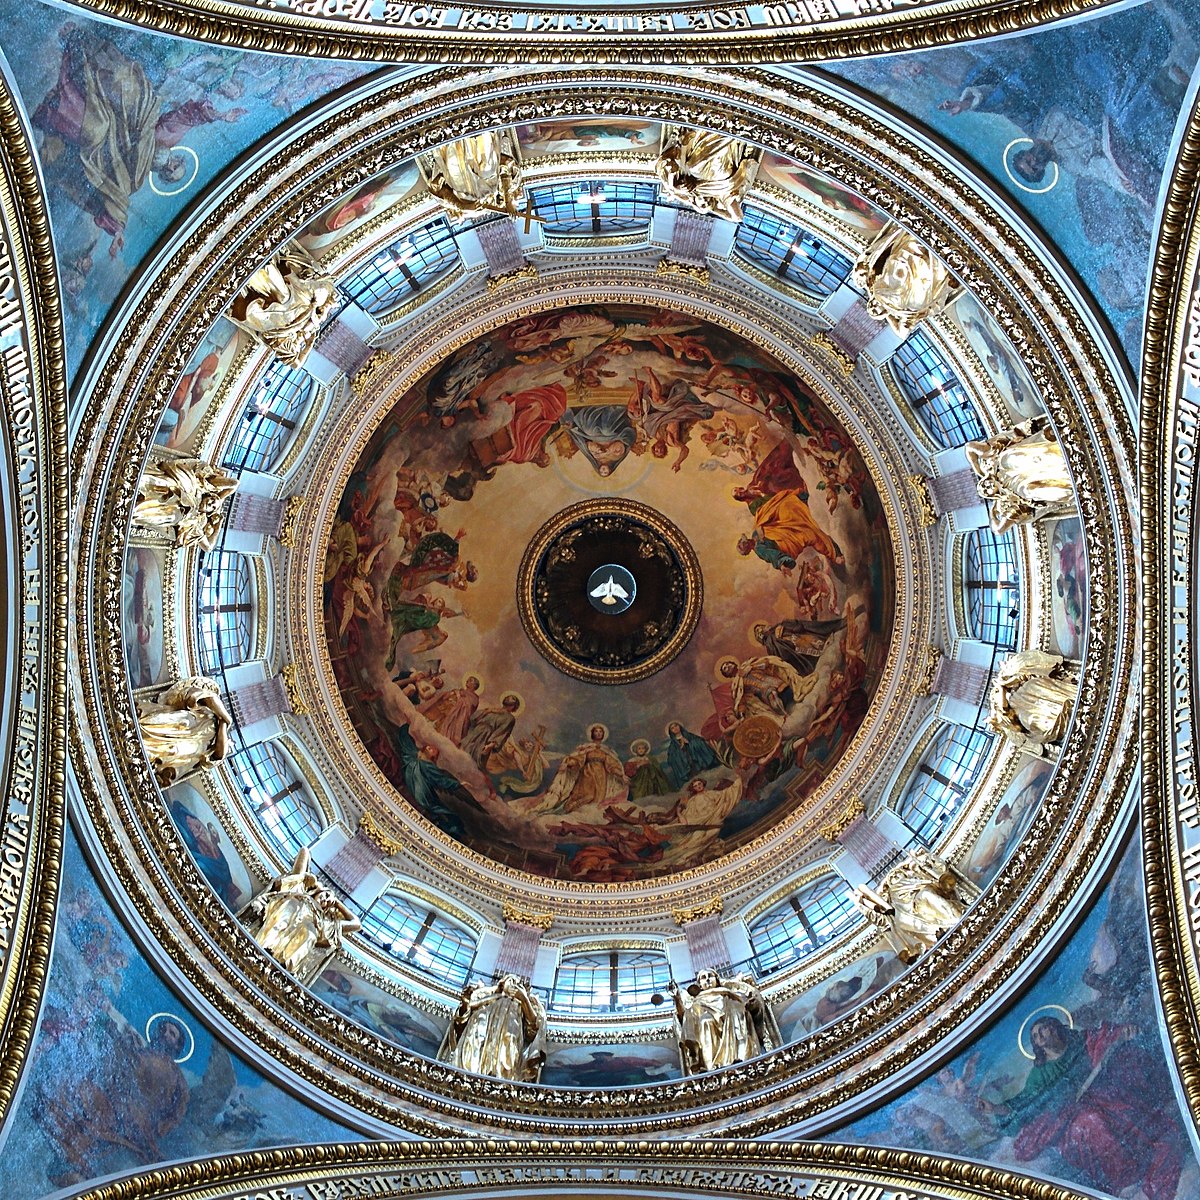 The ceiling of the main dome of Saint Isaac's Cathedral, Saint Petersburg Photograph: Ansttia Licensing: CC-BY-SA-4.0